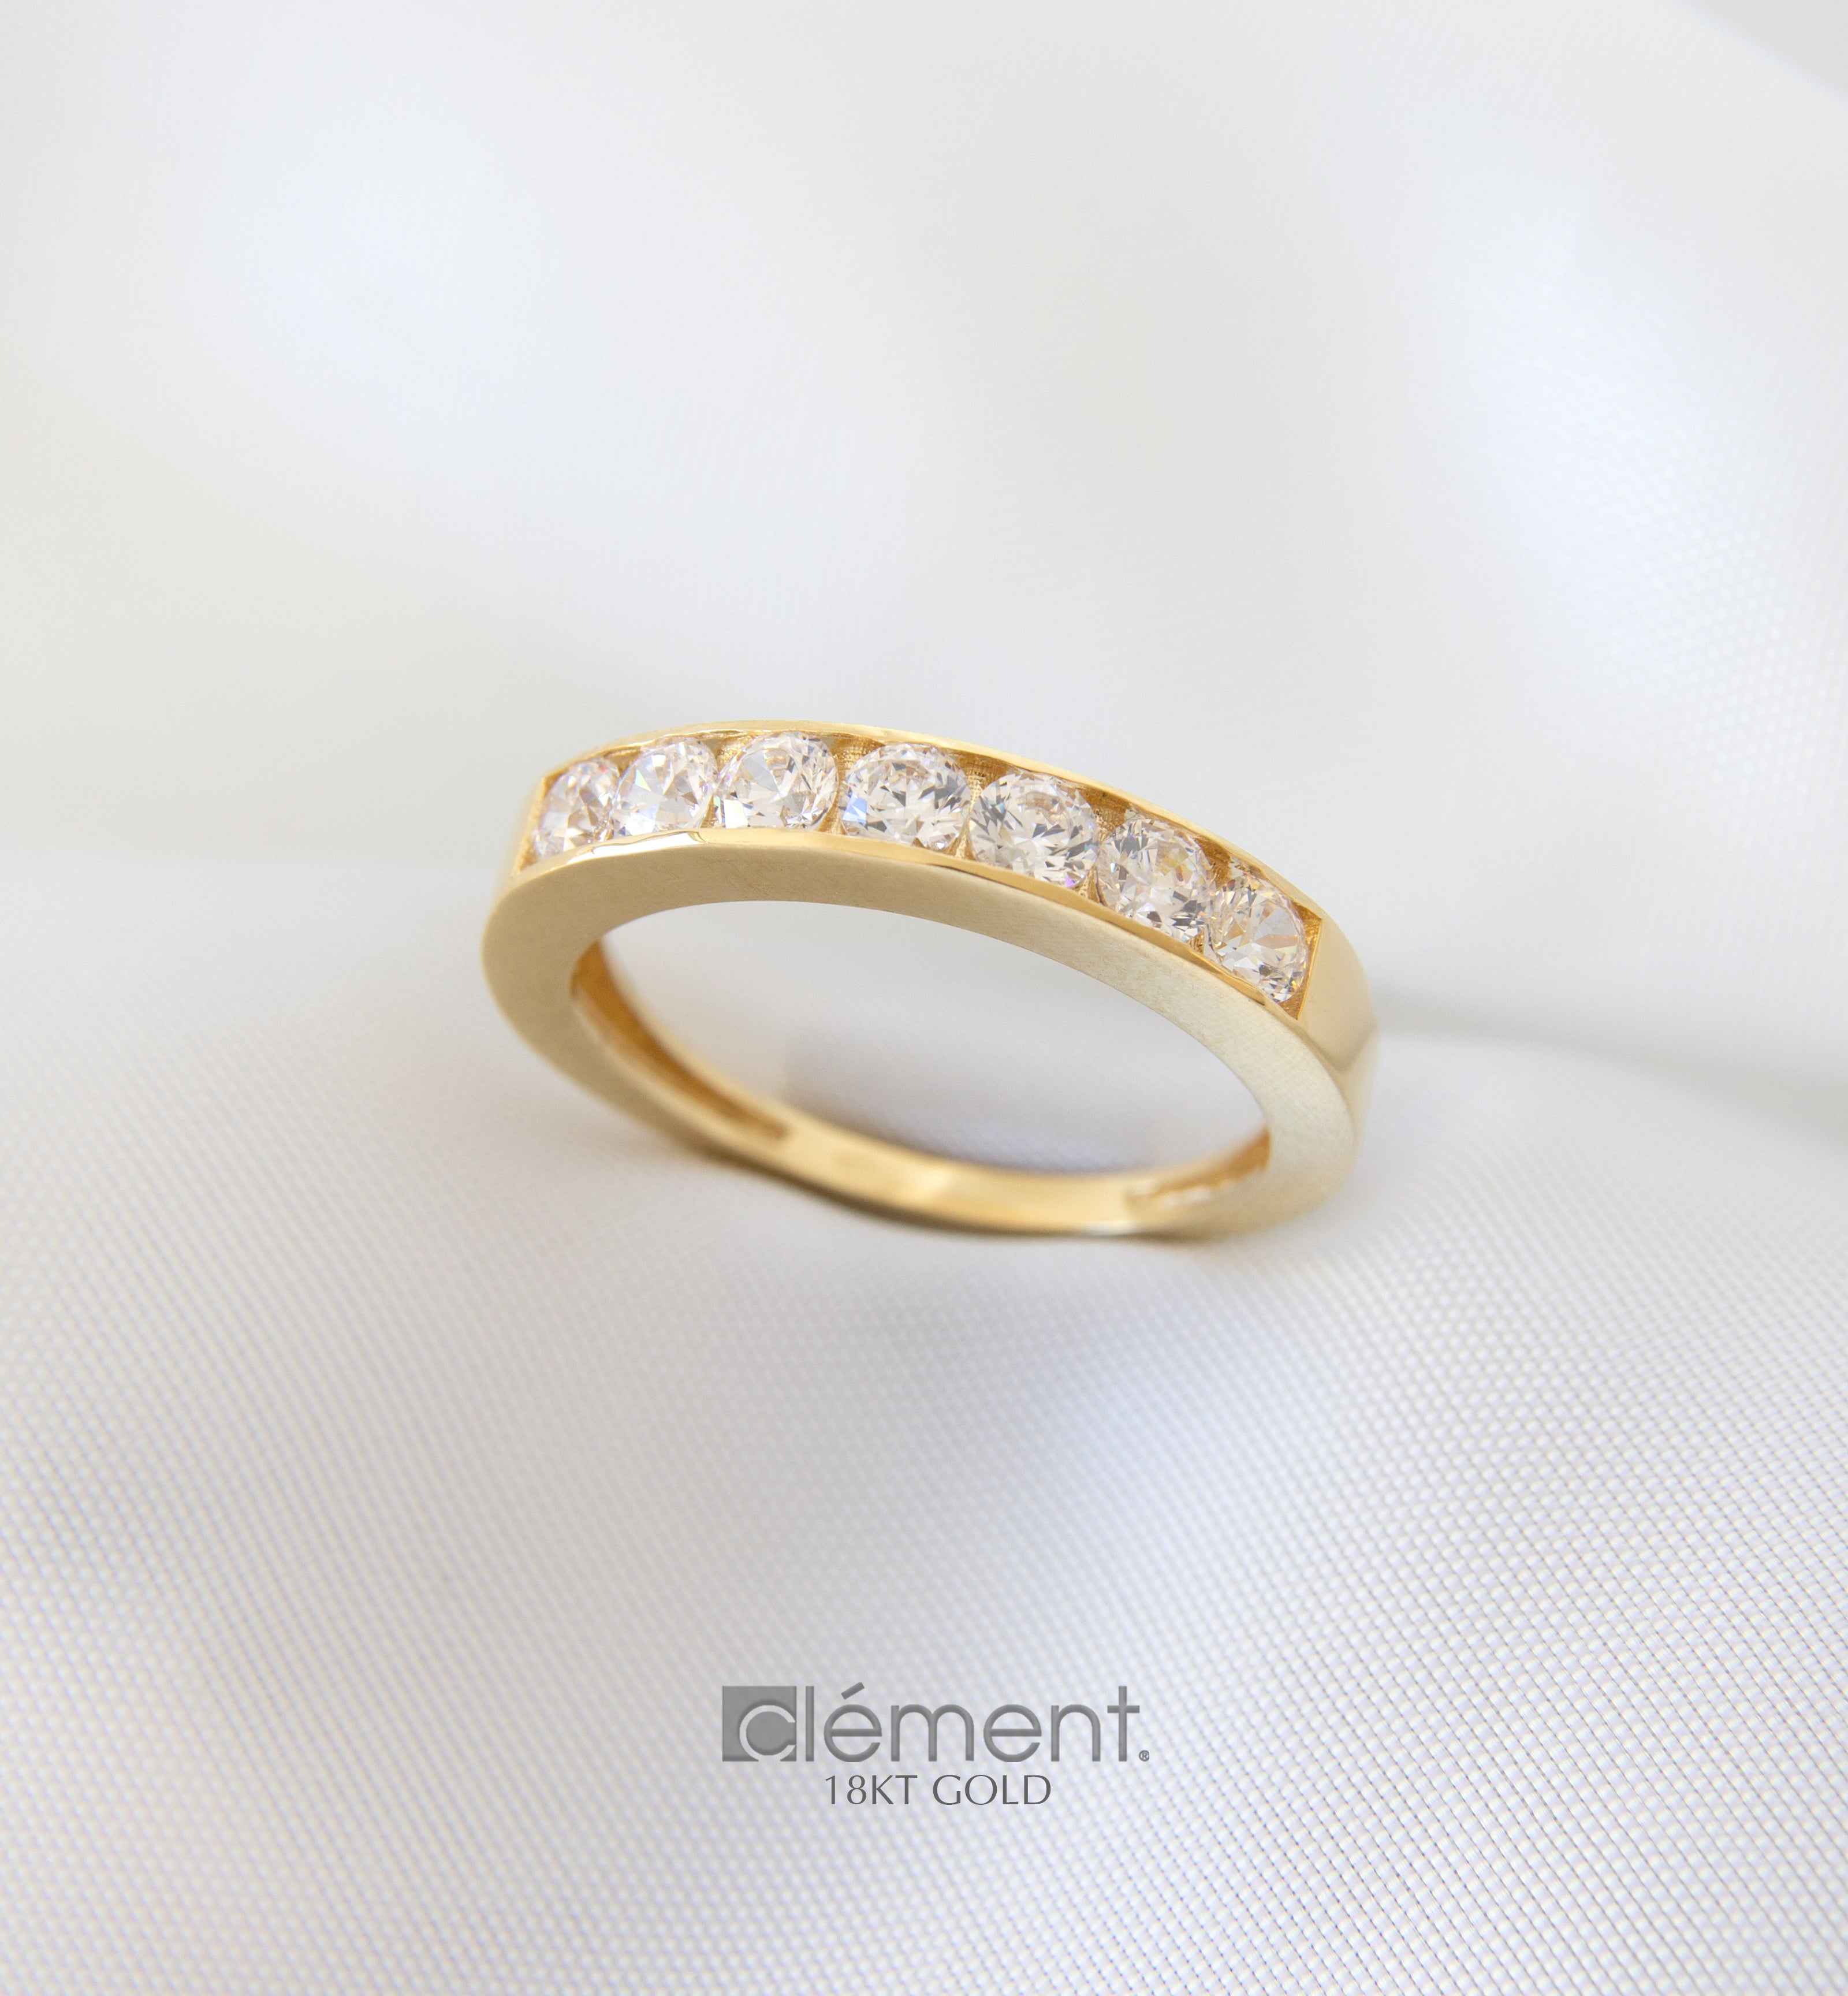 18ct Gold Ring with CZ Stones